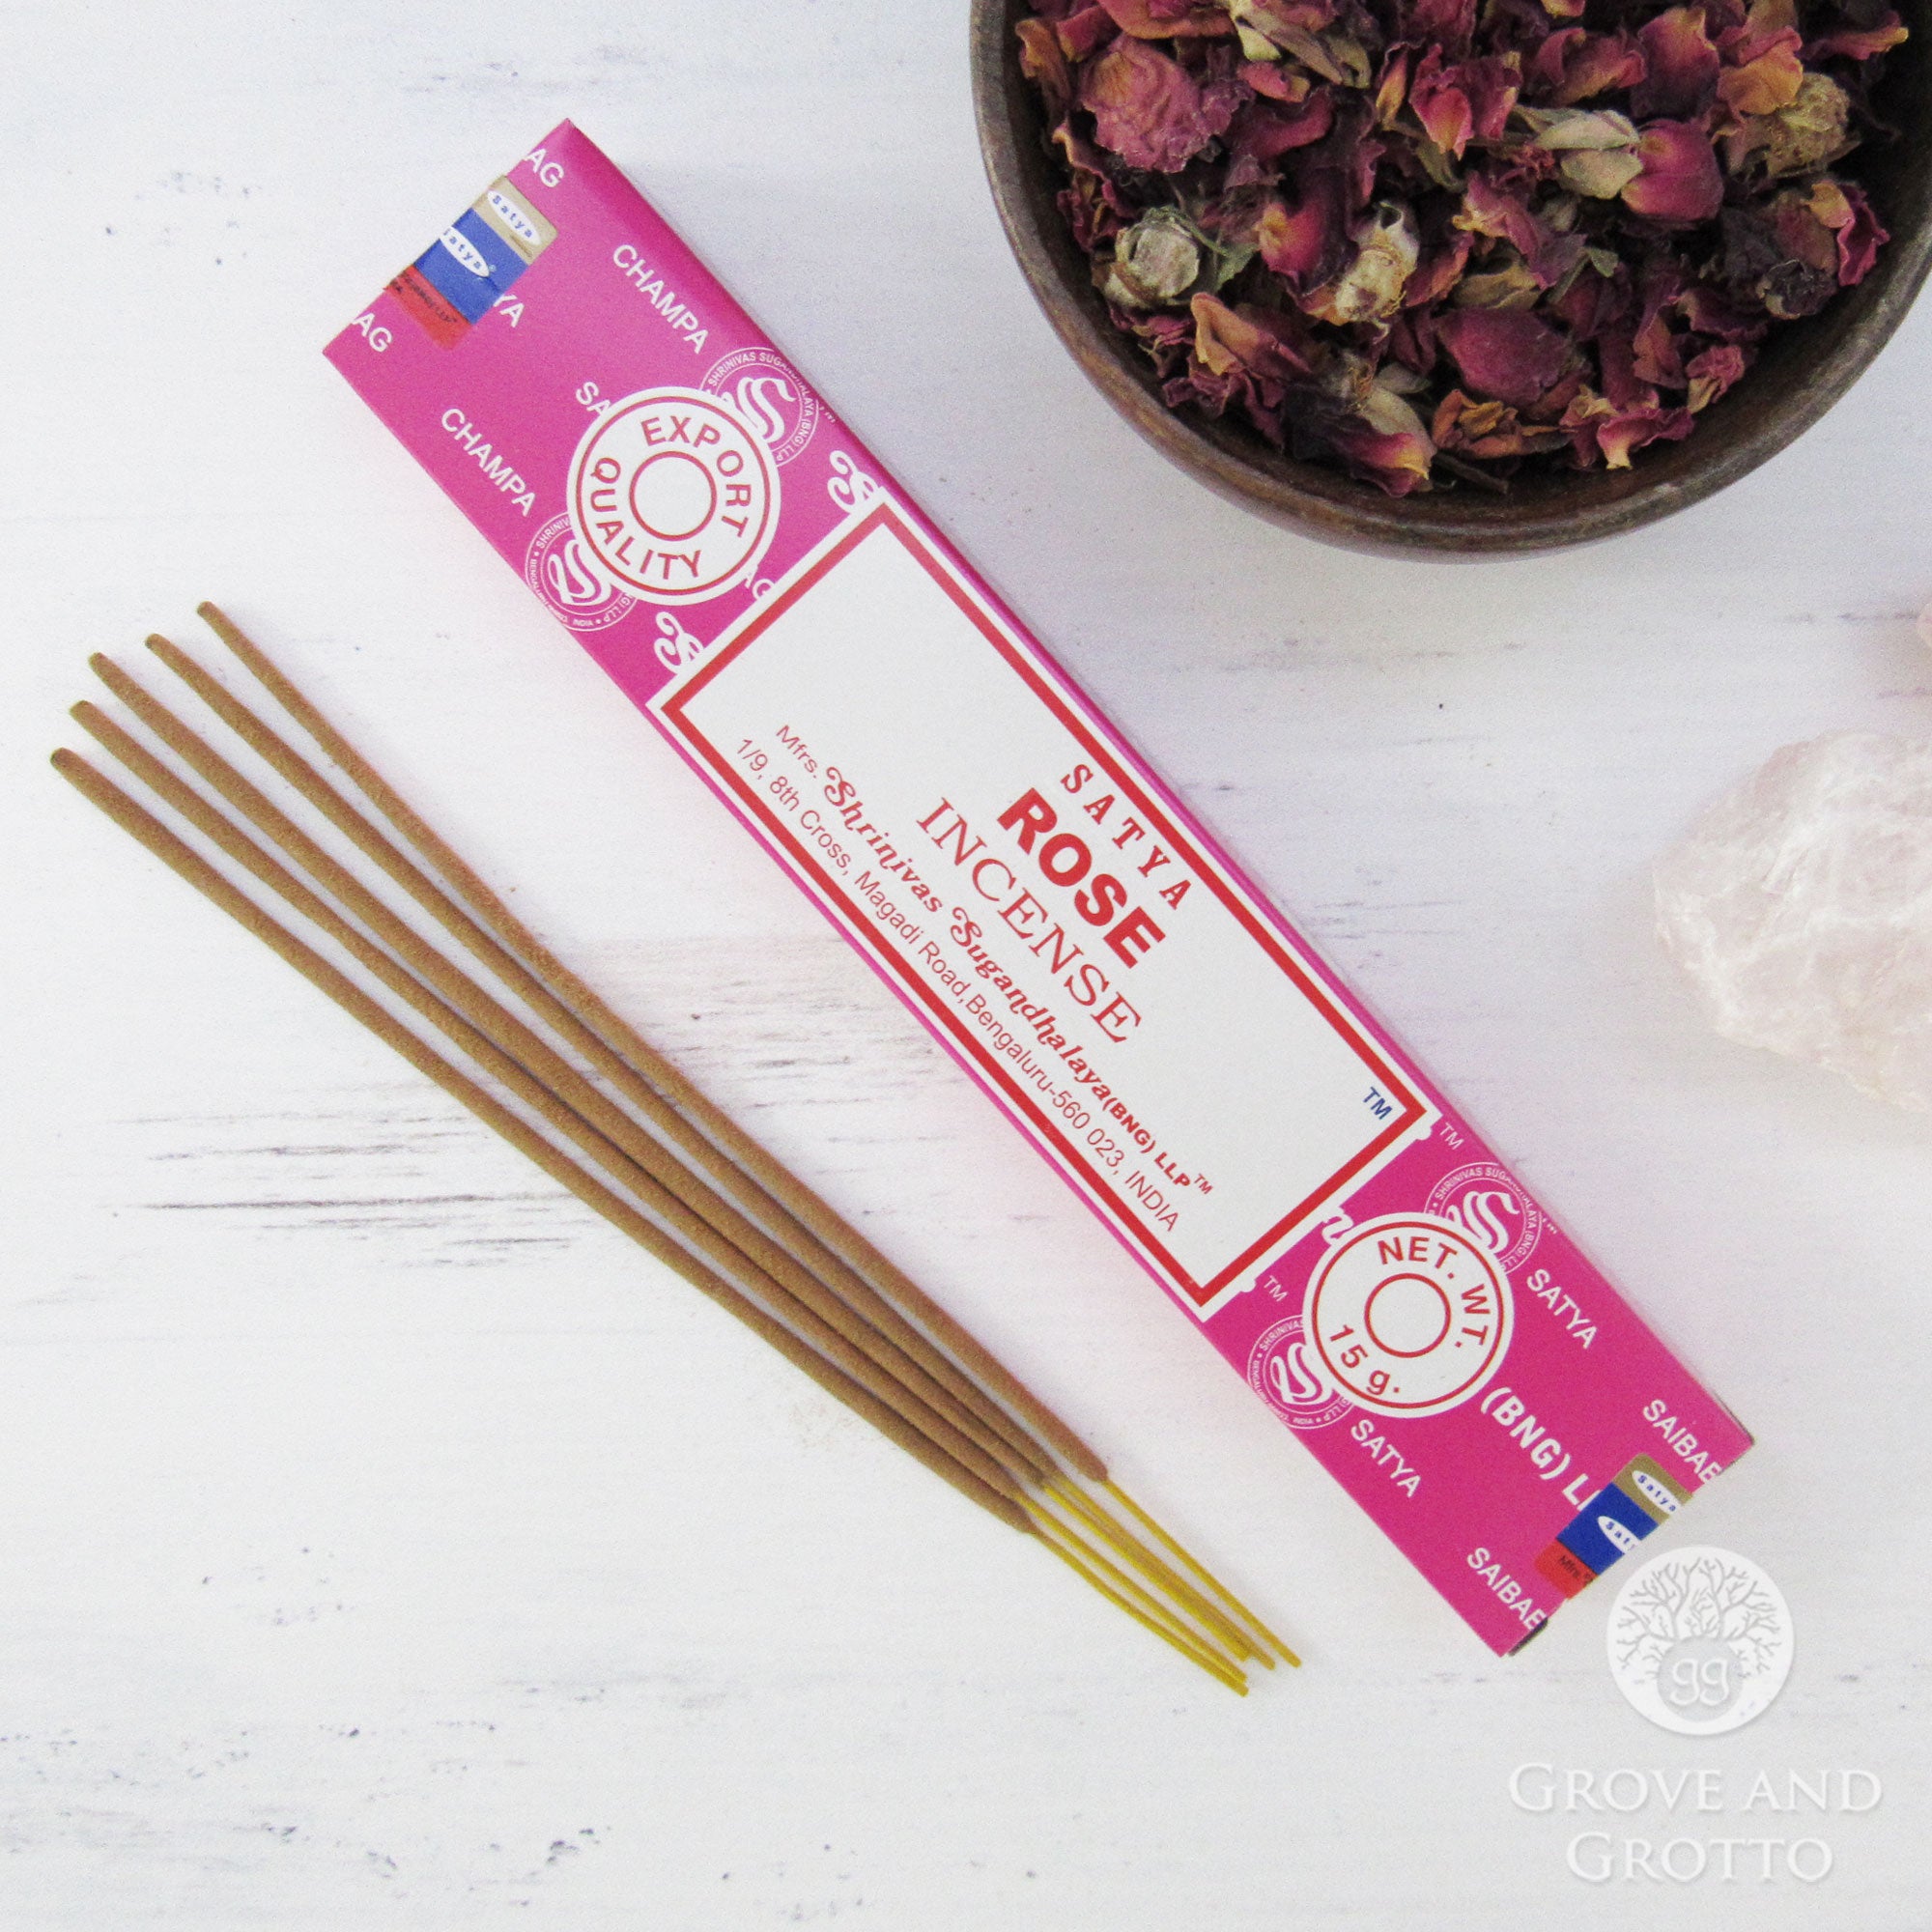 Rose Incense Sticks (15 g) by Satya – Grove and Grotto